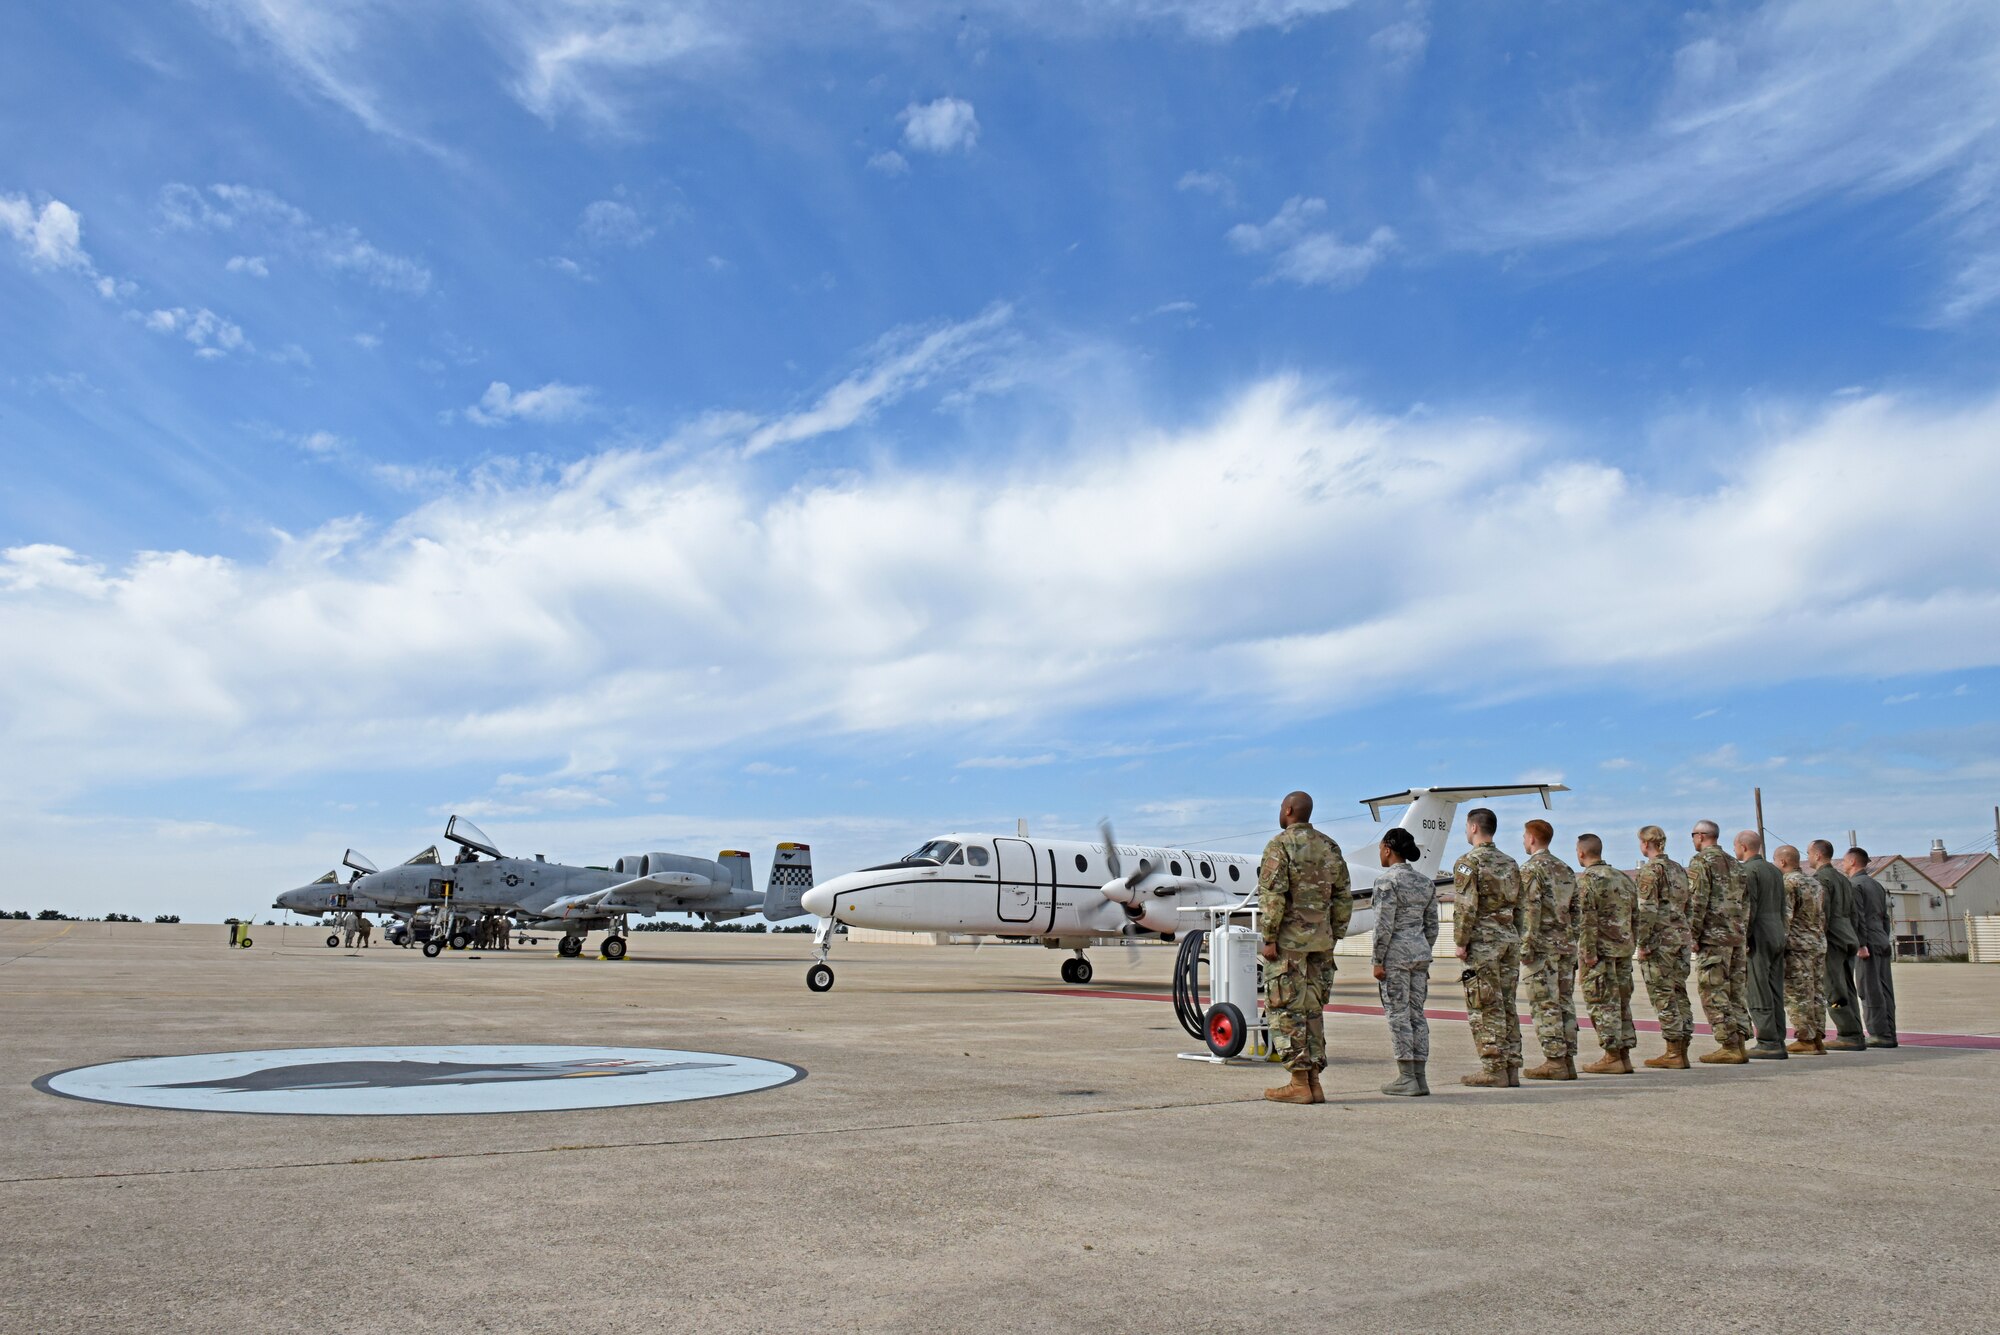 Members of the Wolf Pack stand at attention during the departure of U.S. Air Force Gen. CQ Brown, Jr. Pacific Air Forces commander, from Kunsan Air Base, Republic of Korea, Oct. 18, 2019. Brown was stationed at Kunsan from April 1987 to October 1988 as a first lieutenant and then again from May 2007 to May 2008, where he led the Wolf Pack as “Wolf 46.” (U.S. Air Force photo by Staff Sgt. Mackenzie Mendez)